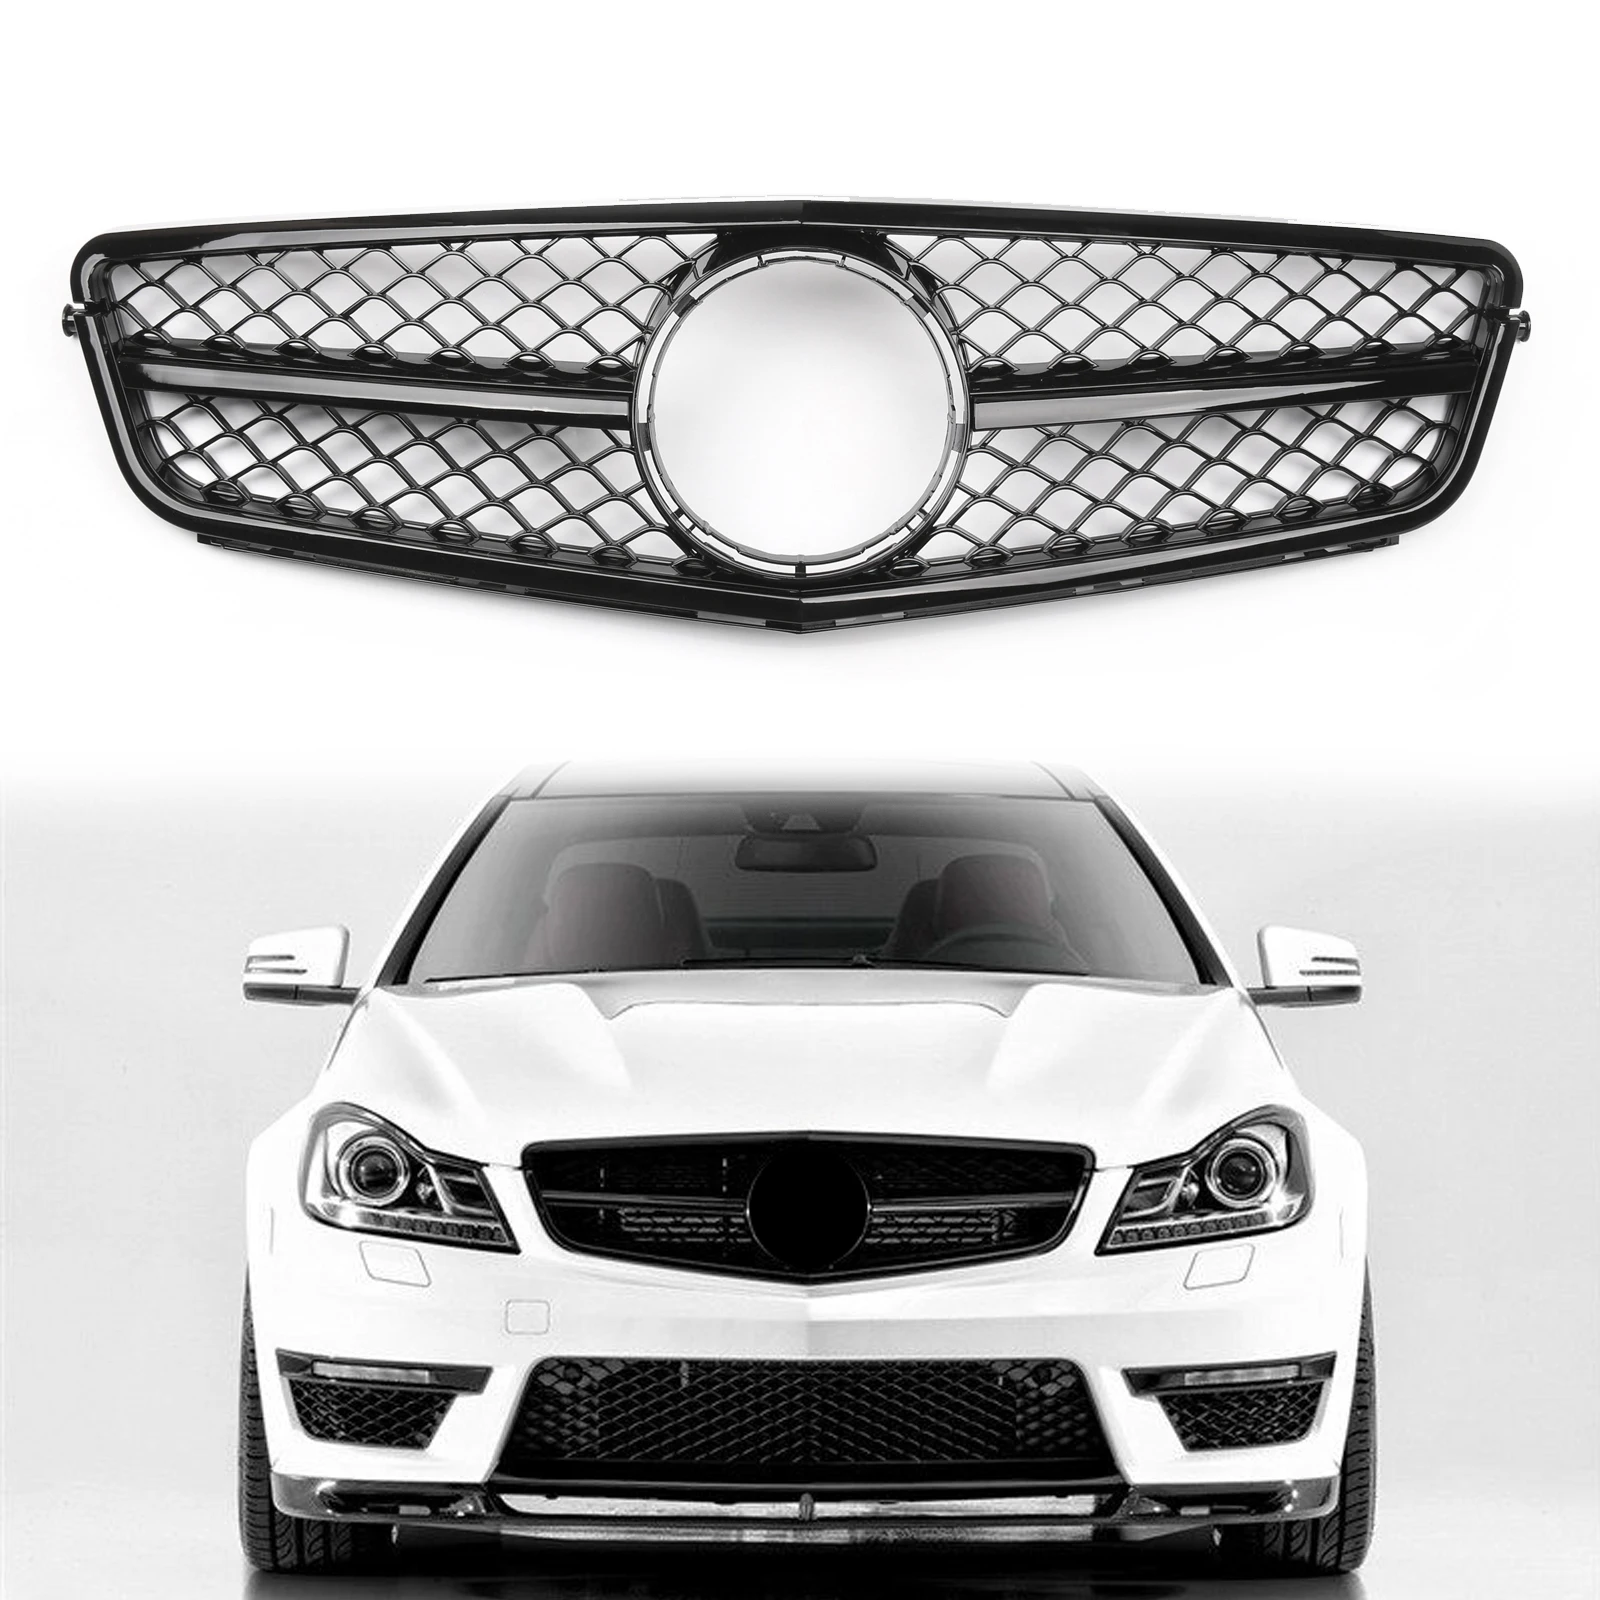 

Areyourshop AMG Black Front Bumper Grille Grill For Mercedes-Benz C-Class W204 C300 C350 2008-2014 With Logo